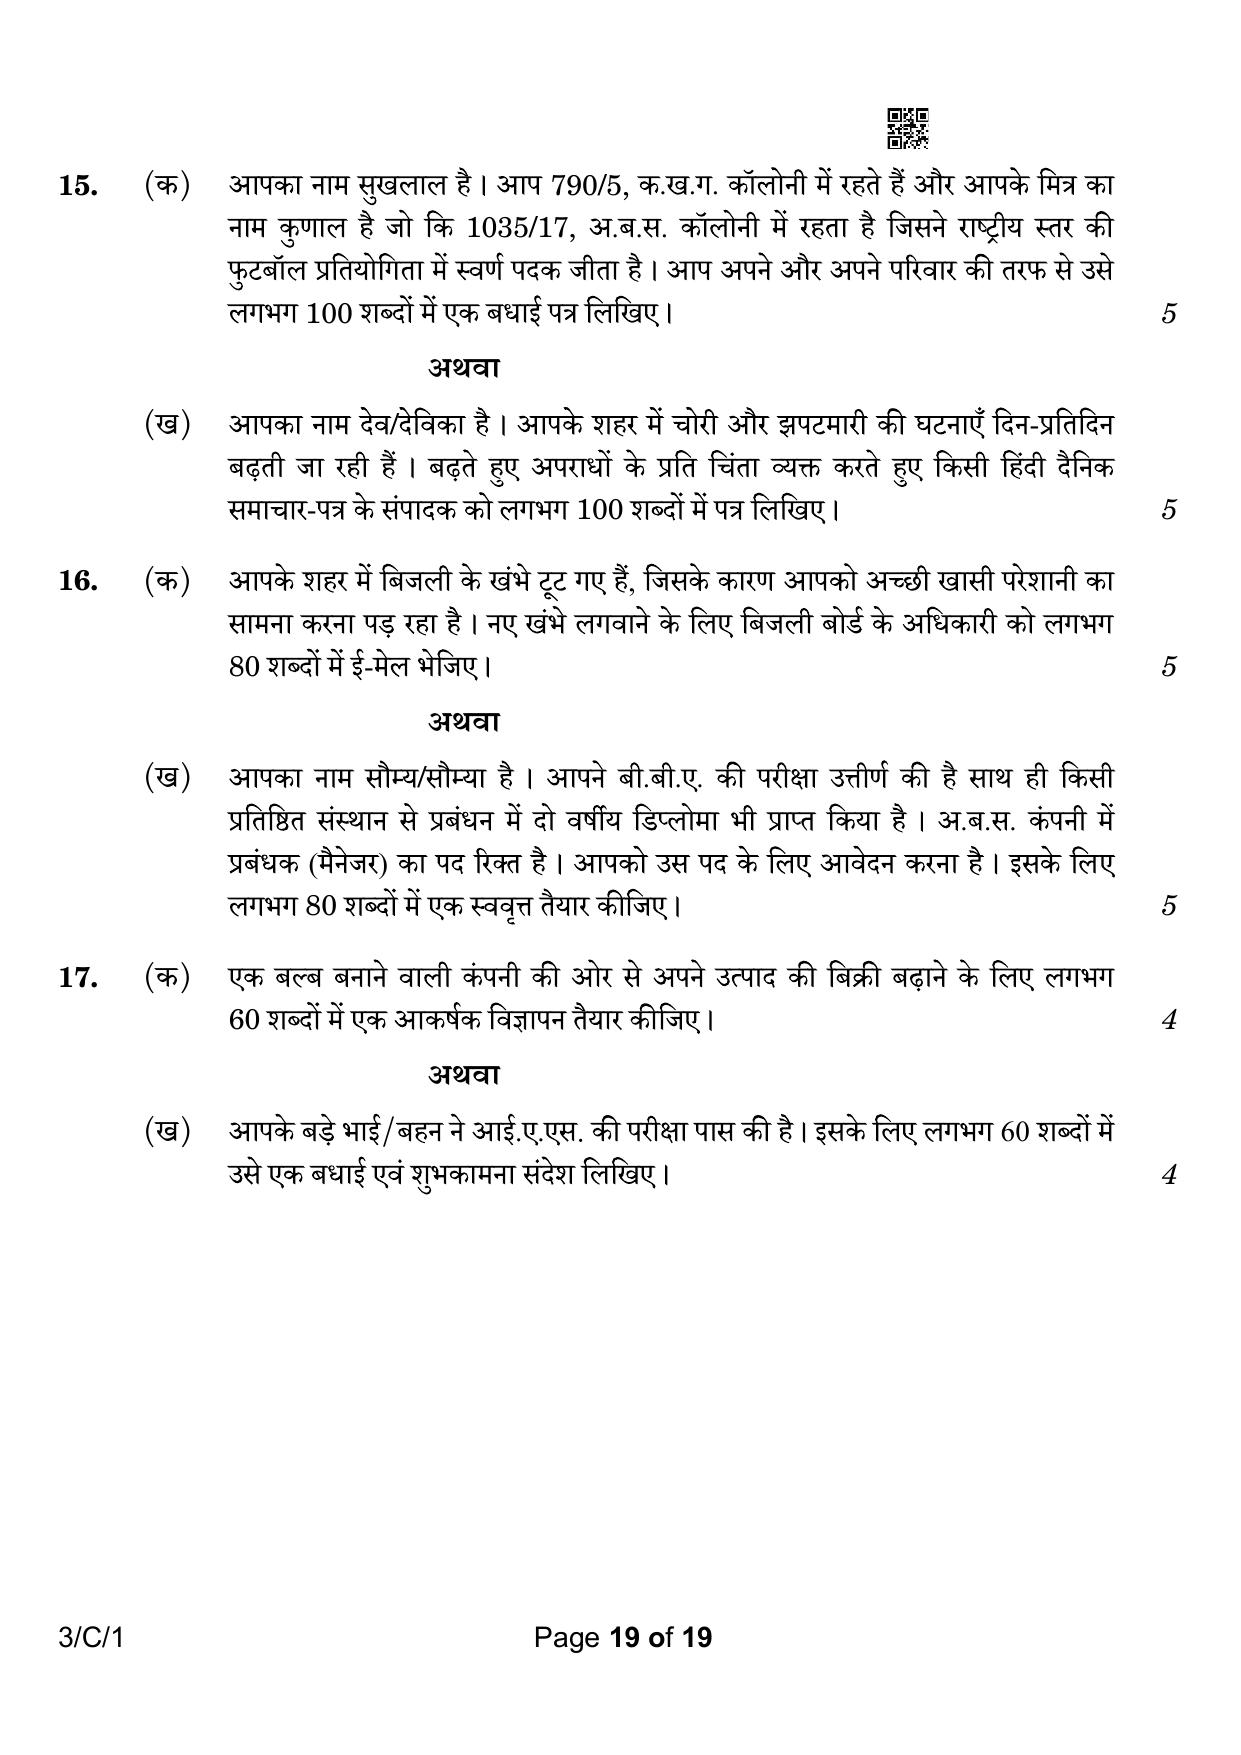 CBSE Class 10 3-1 Hindi A 2023 (Compartment) Question Paper - Page 19